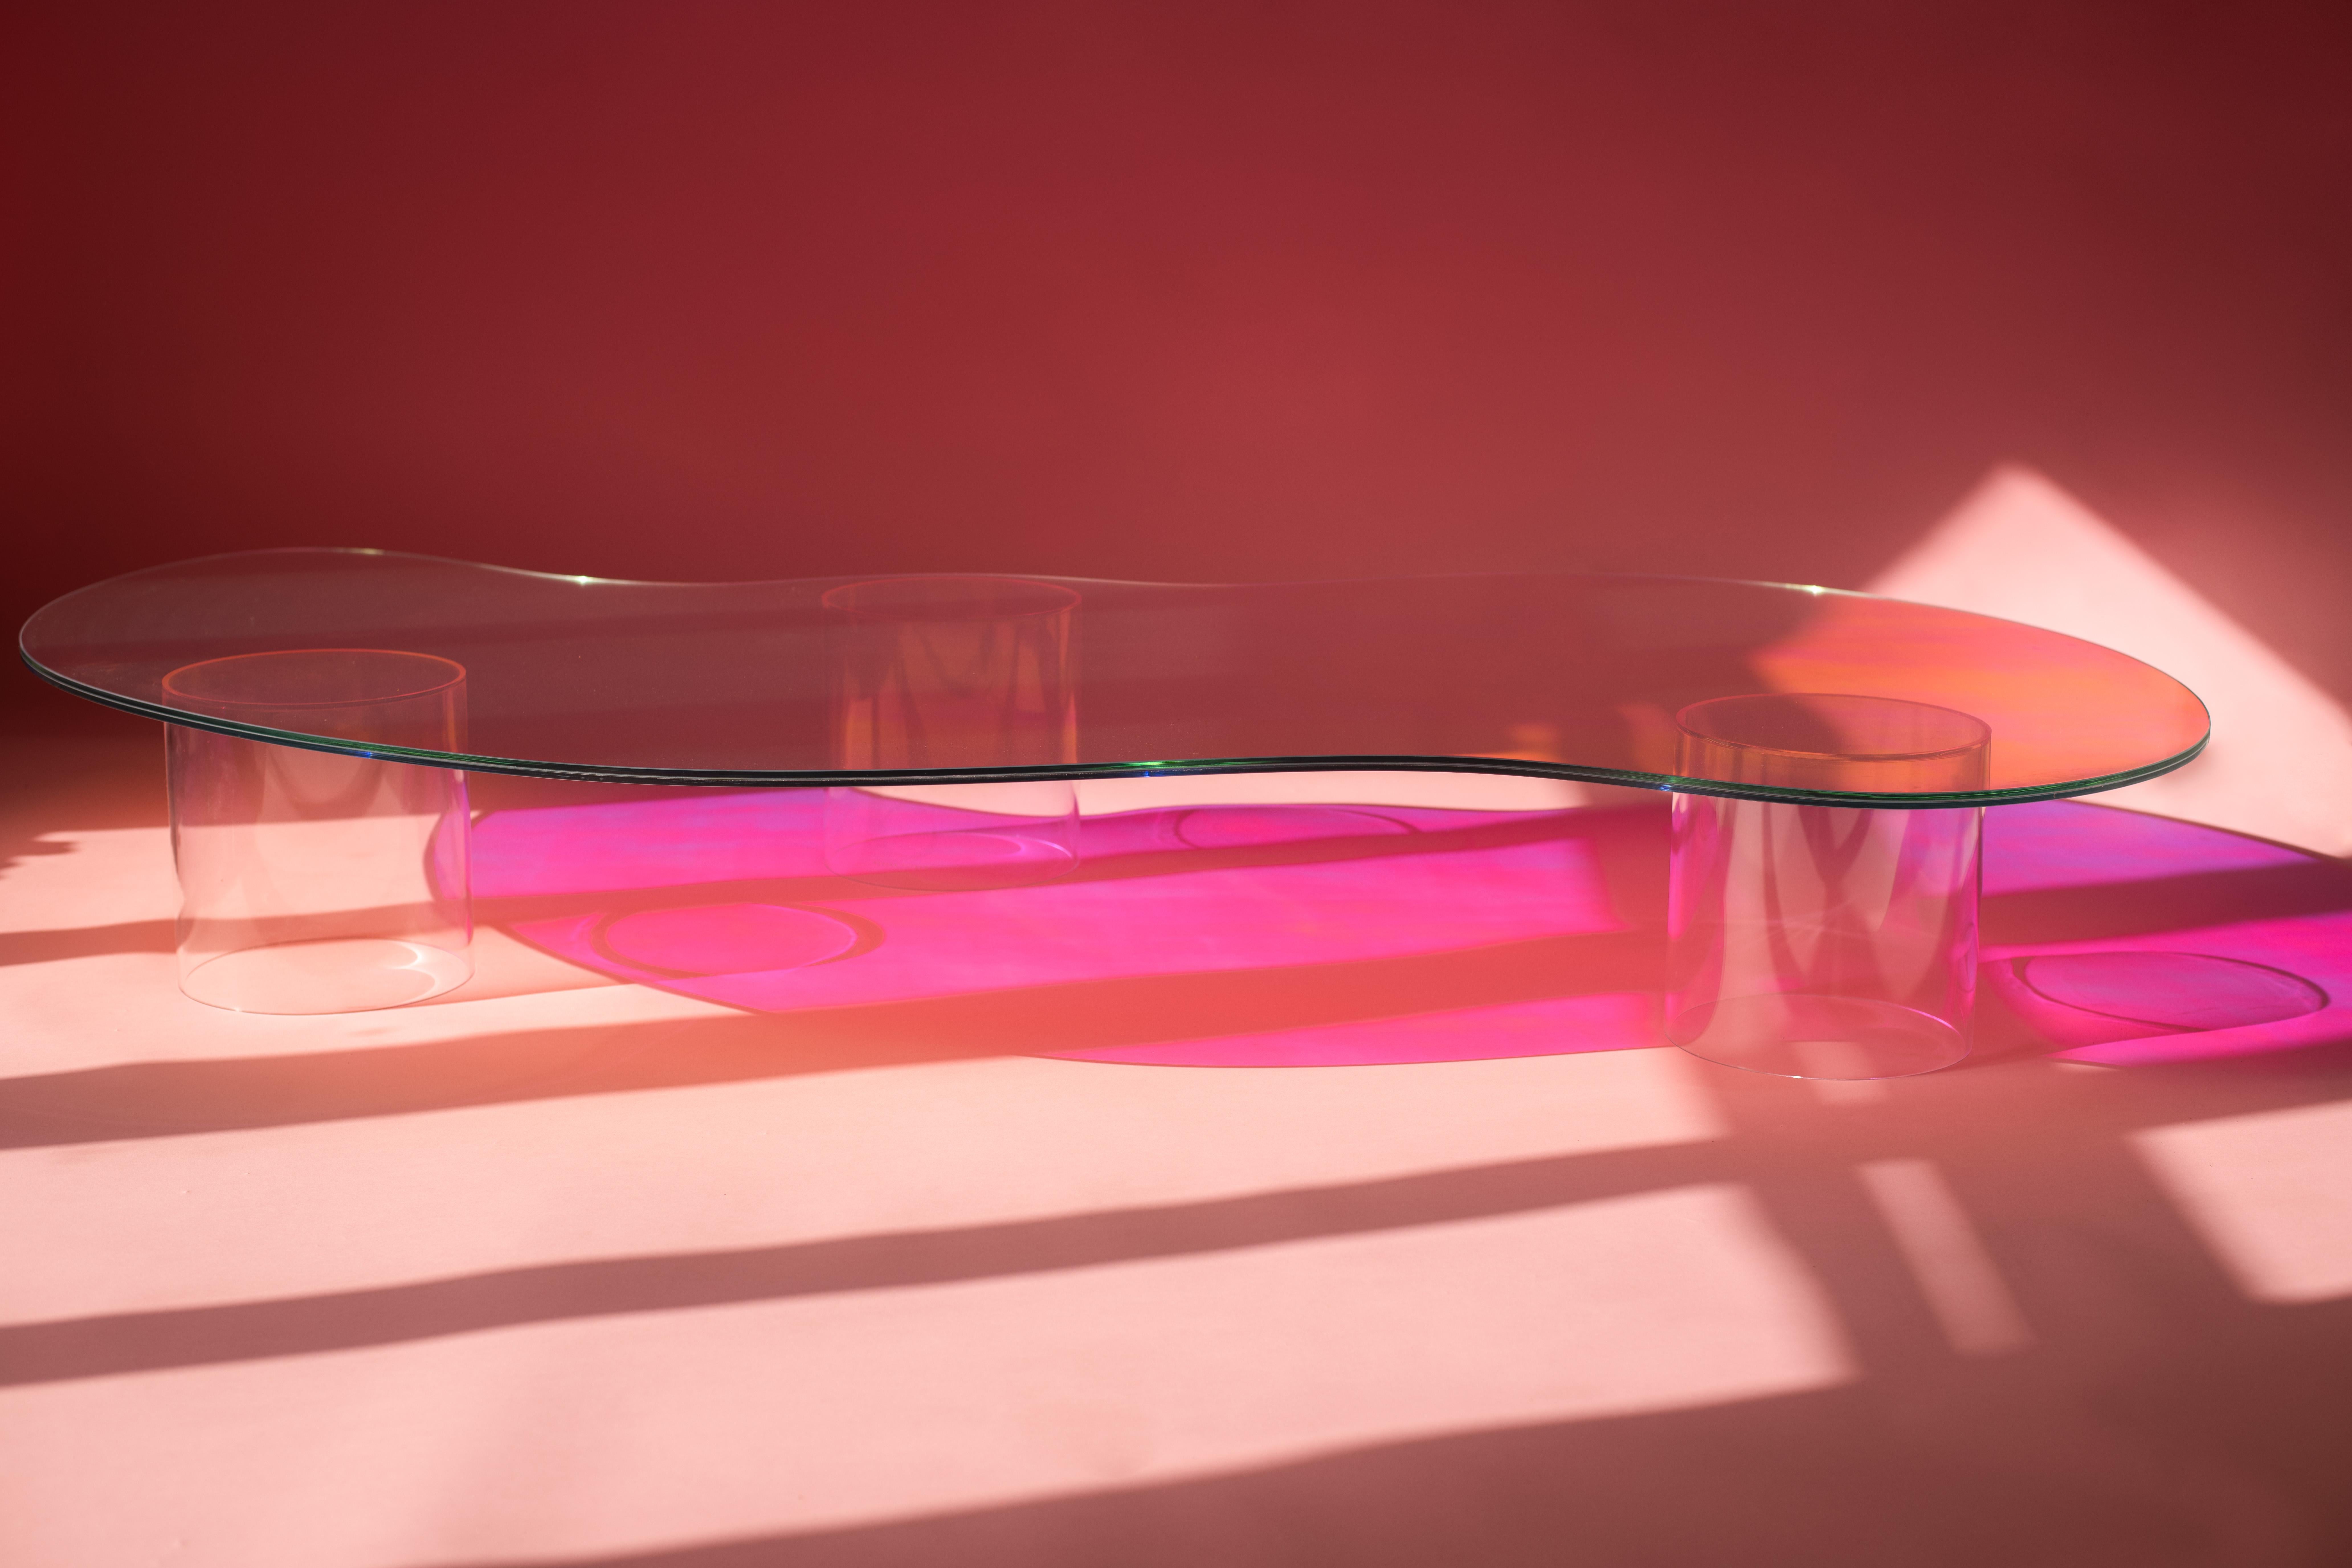 Isola coffee table by Brajak Vitberg.
Dimensions: D 195 x W 100 x H 27 cm.
Materials: laminated dichroic glass + plexi glass.

The table is made out of glass with satin finish and dichroic insert.
The colors in this kind of satin finish are